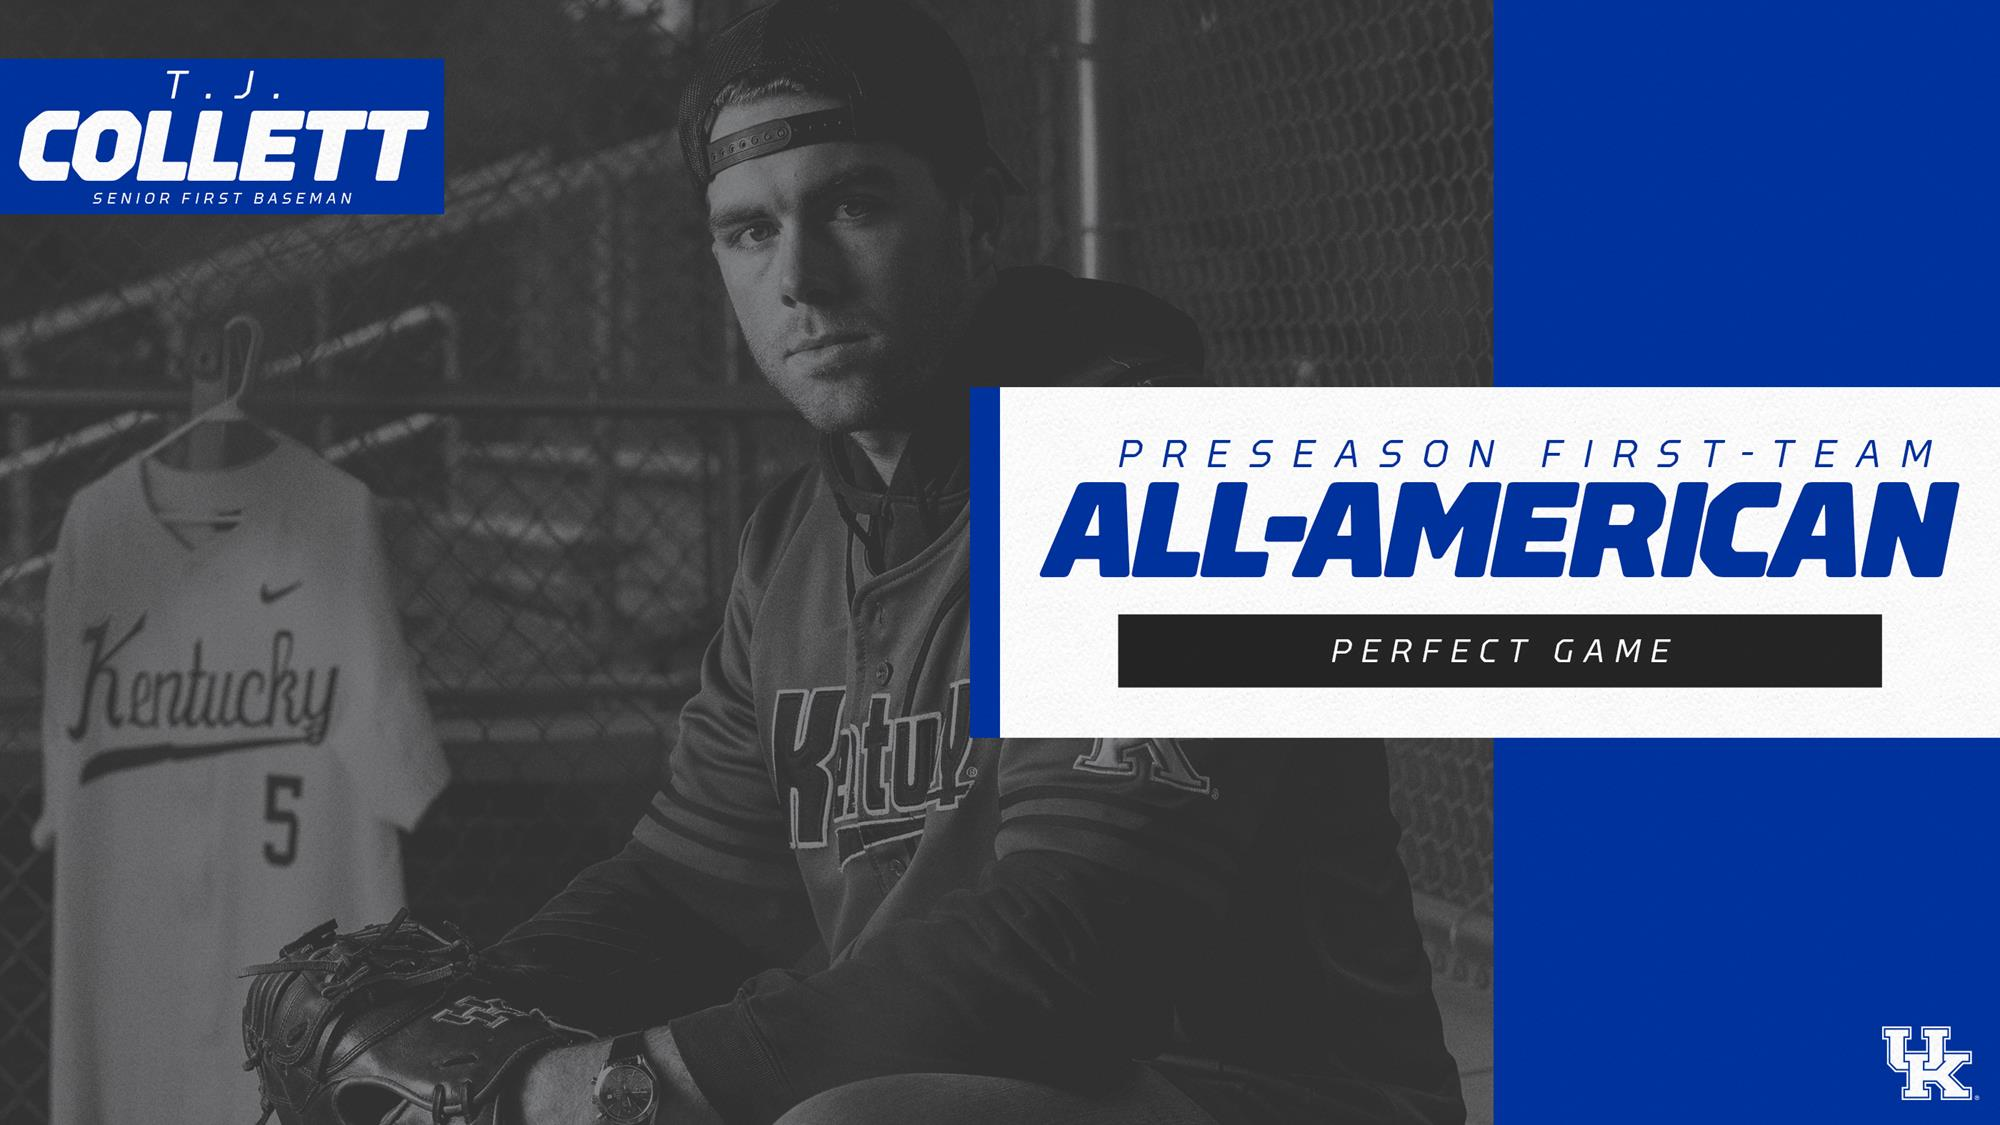 T.J. Collett Named Preseason First-Team All-America by Perfect Game